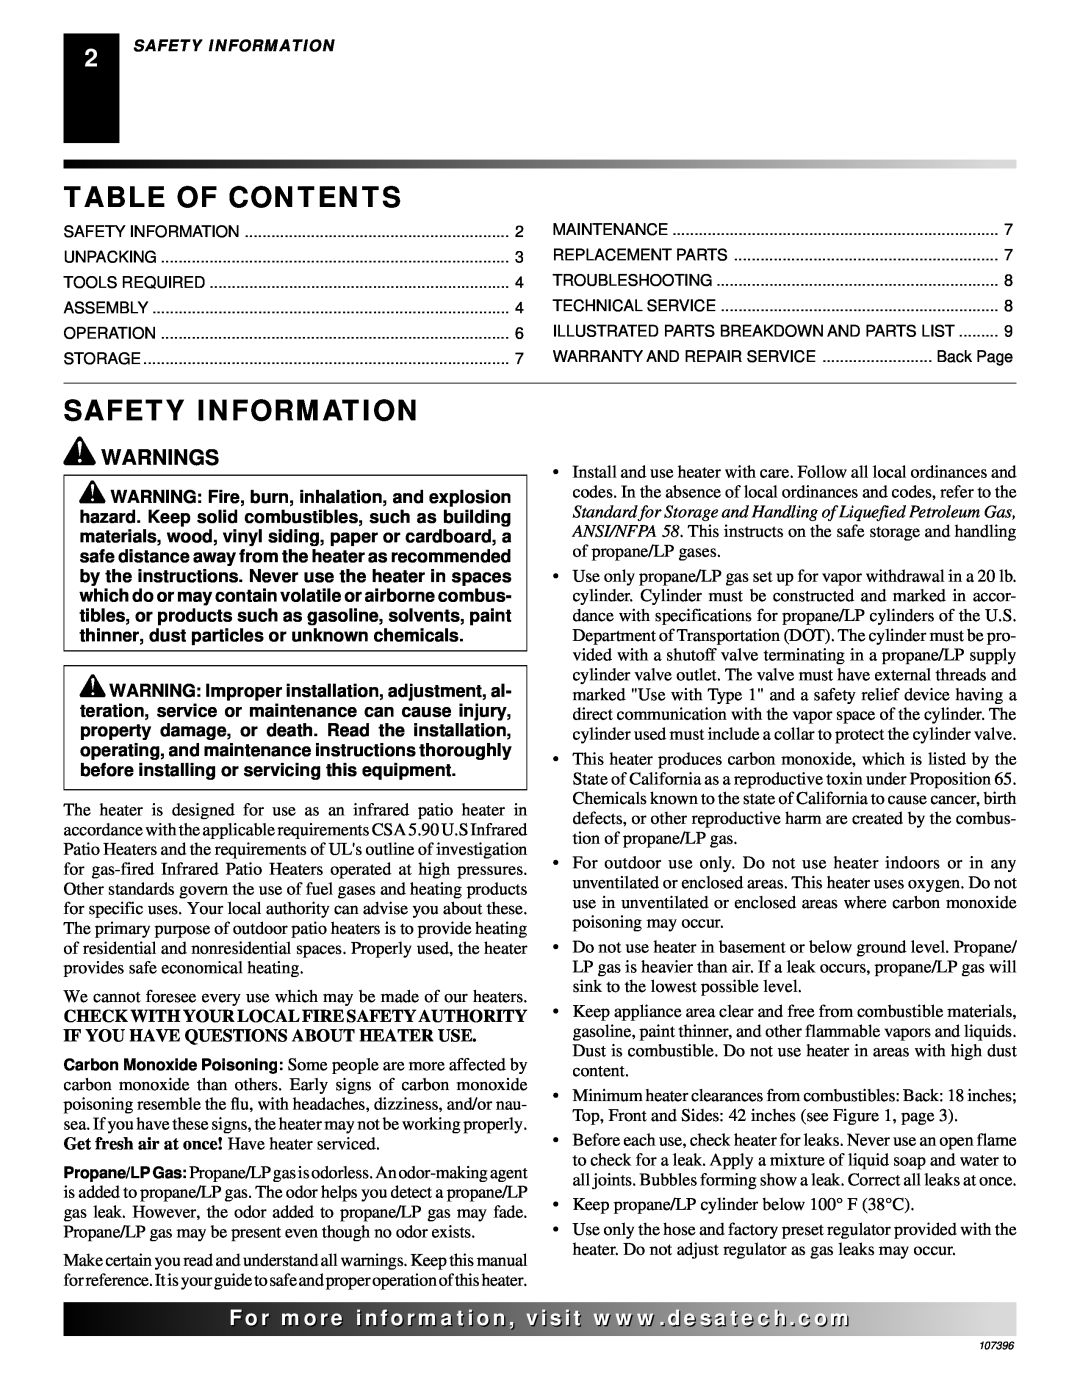 Desa 28BN installation manual Table Of Contents, Safety Information, For..com 